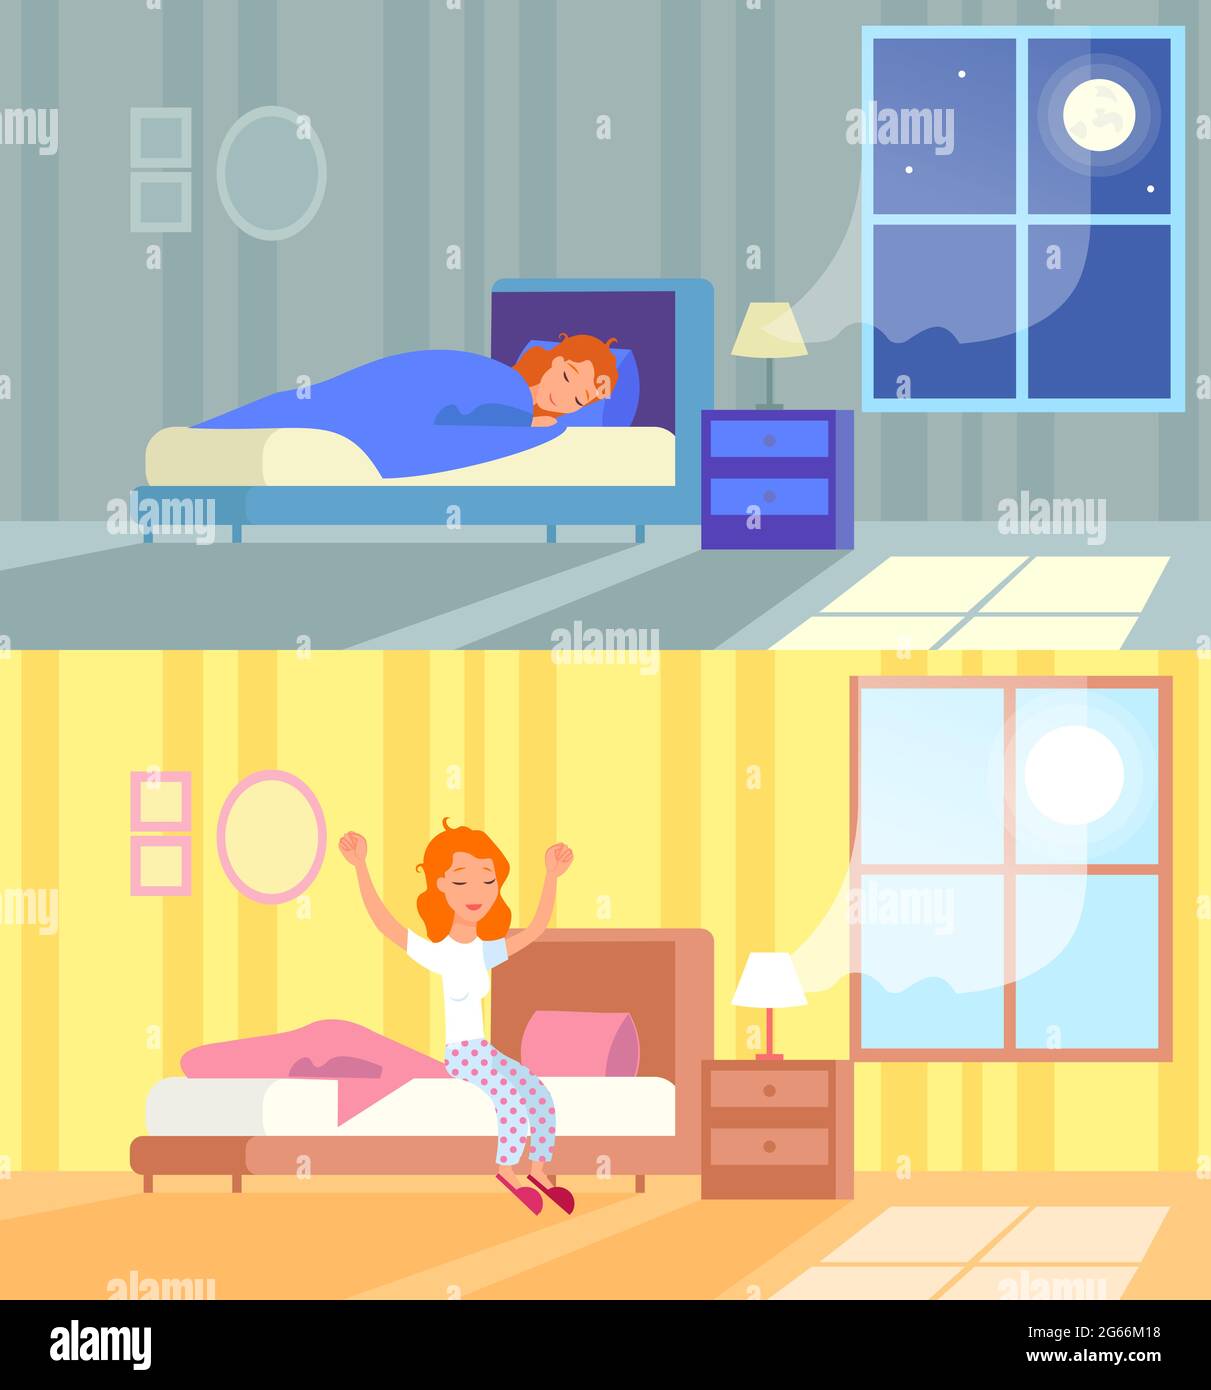 Vector illustration of woman sleeping at night and waking up morning. Sleep in comfy bed concept, good morning, start of the day, wake up. Cartoon Stock Vector